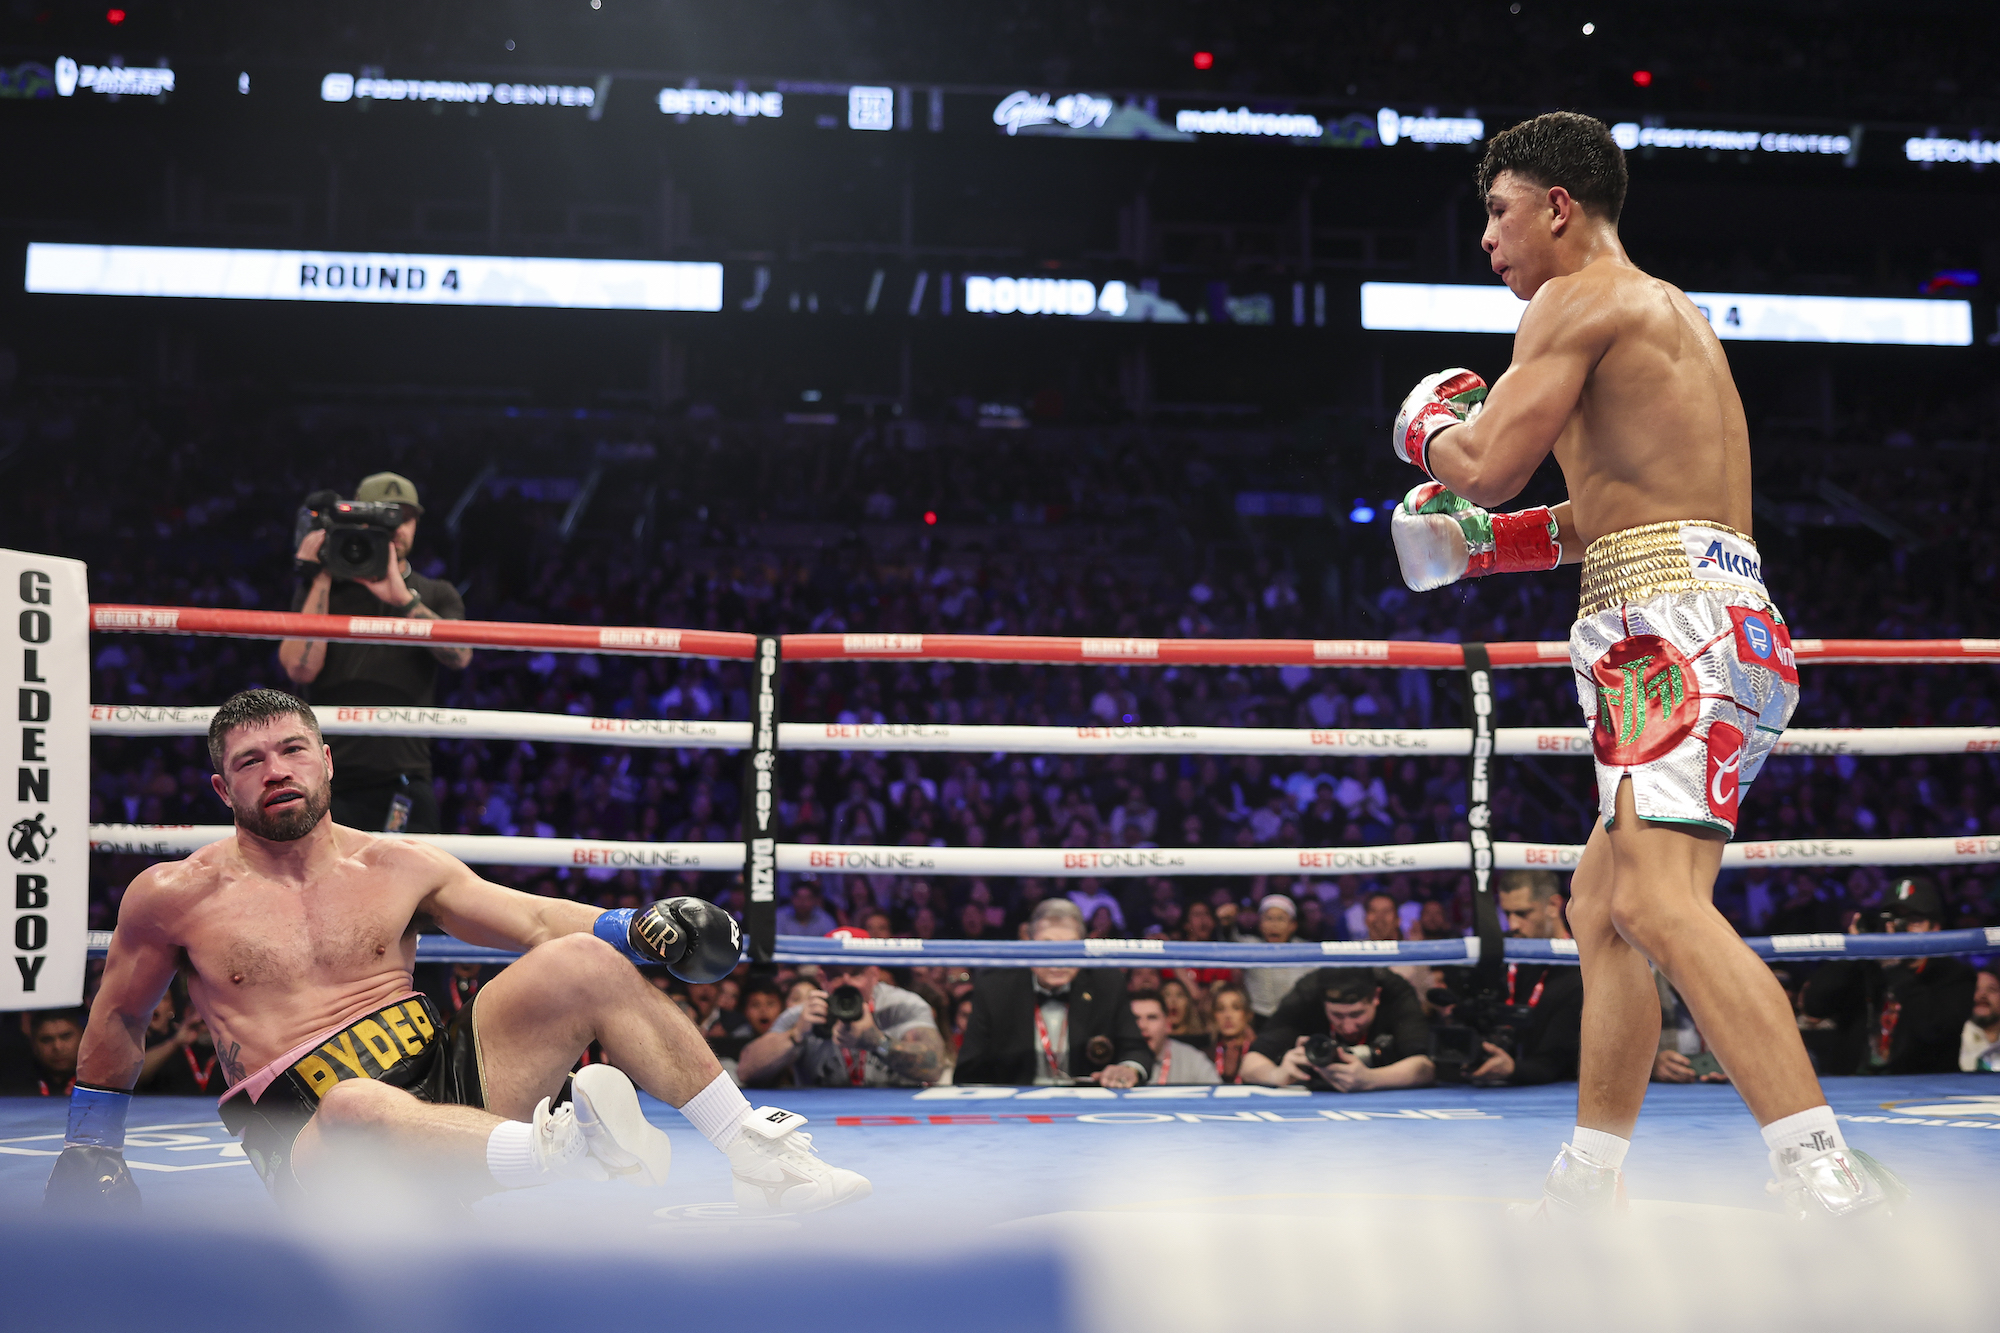 Sensational Munguia drops Ryder four times in dominant 9th round knockout win, says it would be 'an honor' to fight Canelo